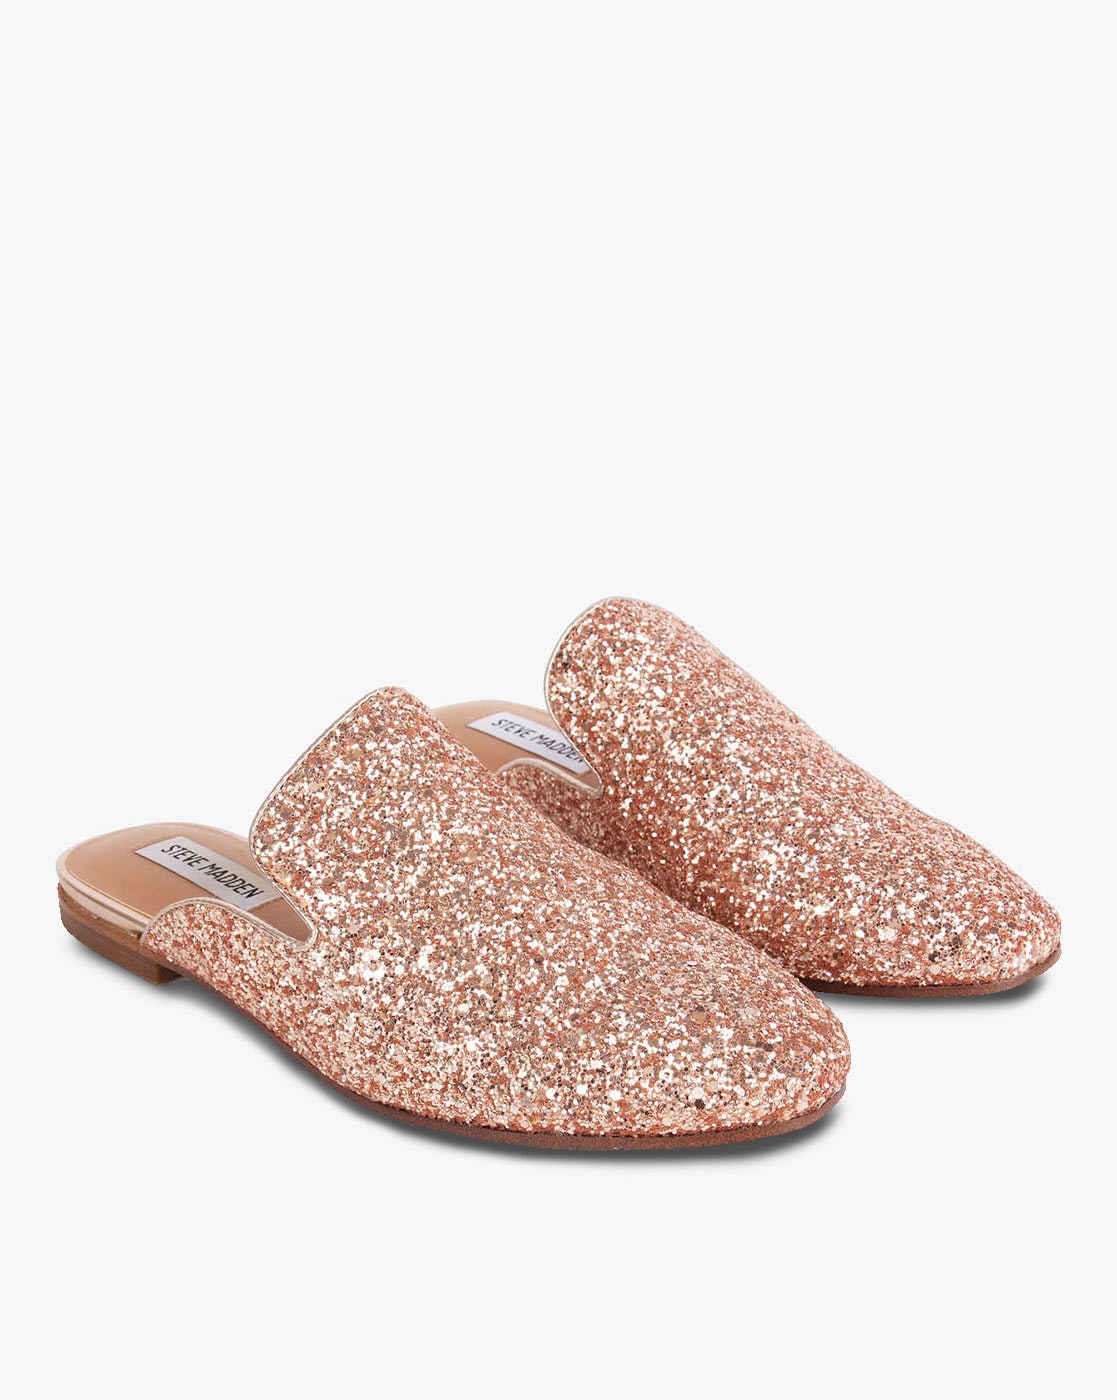 Flat Shoes for Women by STEVE MADDEN 